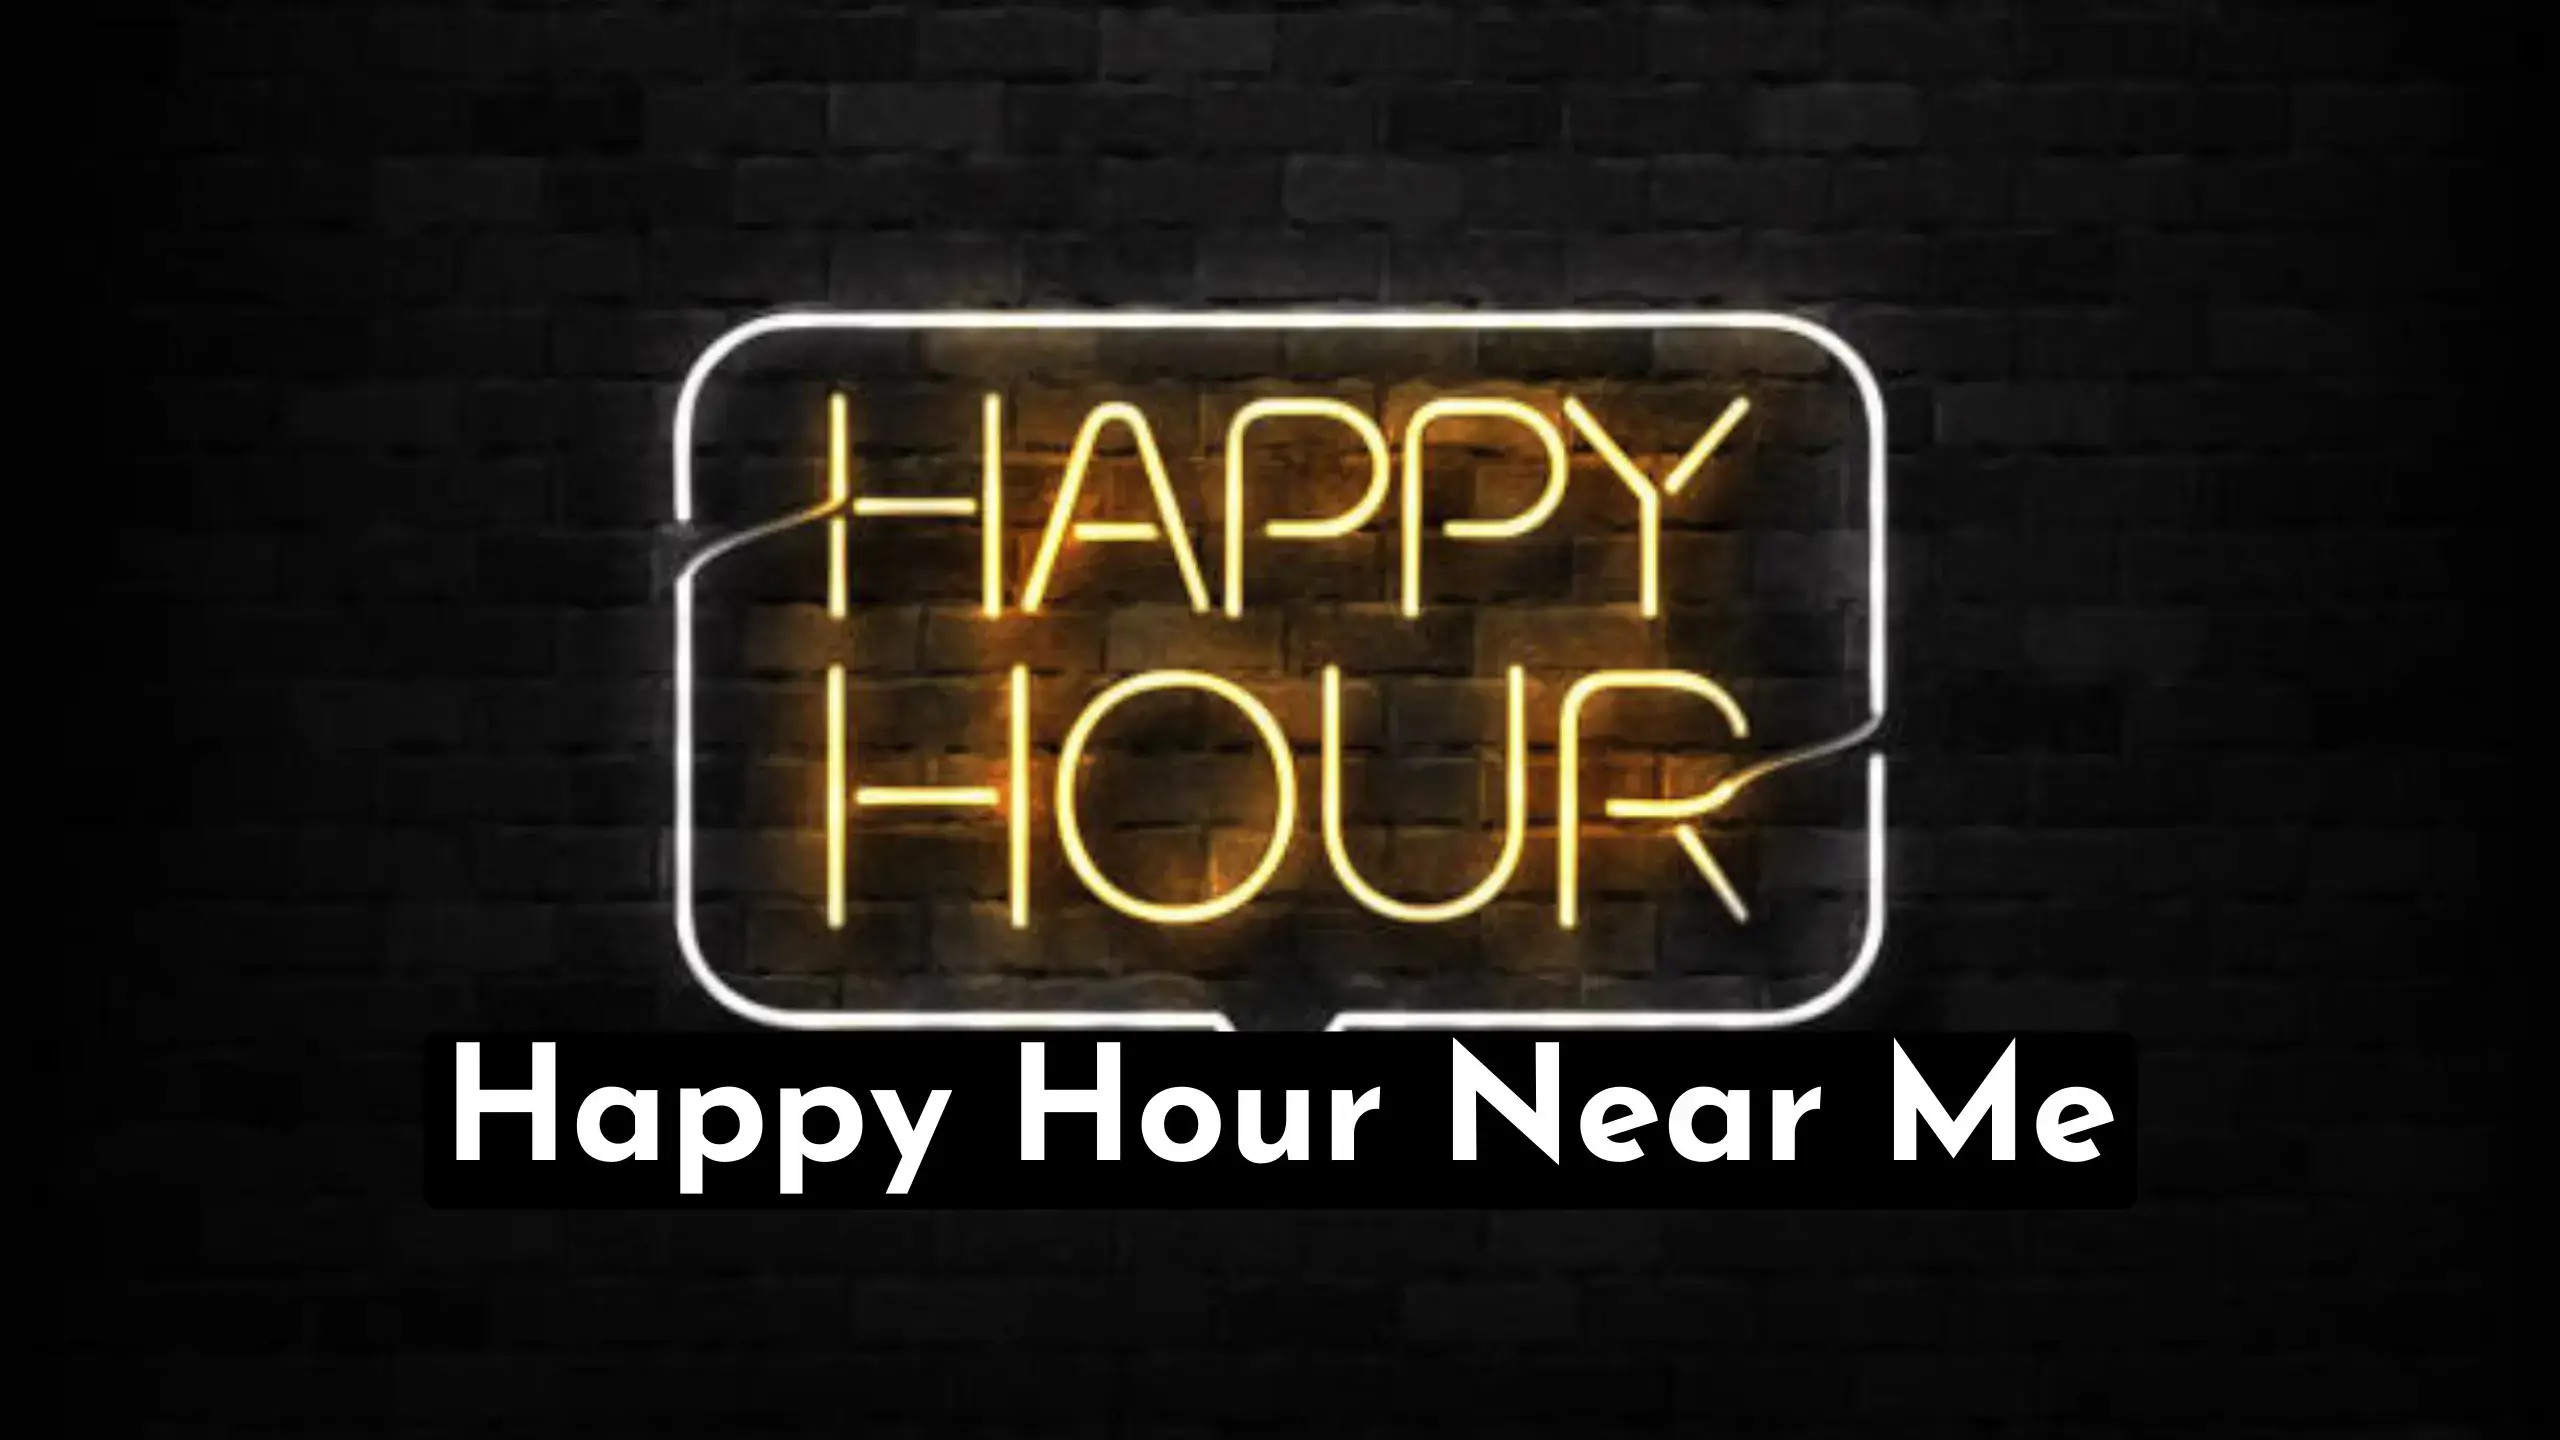 A Quick Guide To Happy Hour Near Me Blogpost | Also Quickly Find The Best Happy Hour Restaurant Locations, Deals, Discounts & Benefits. store-hour.com